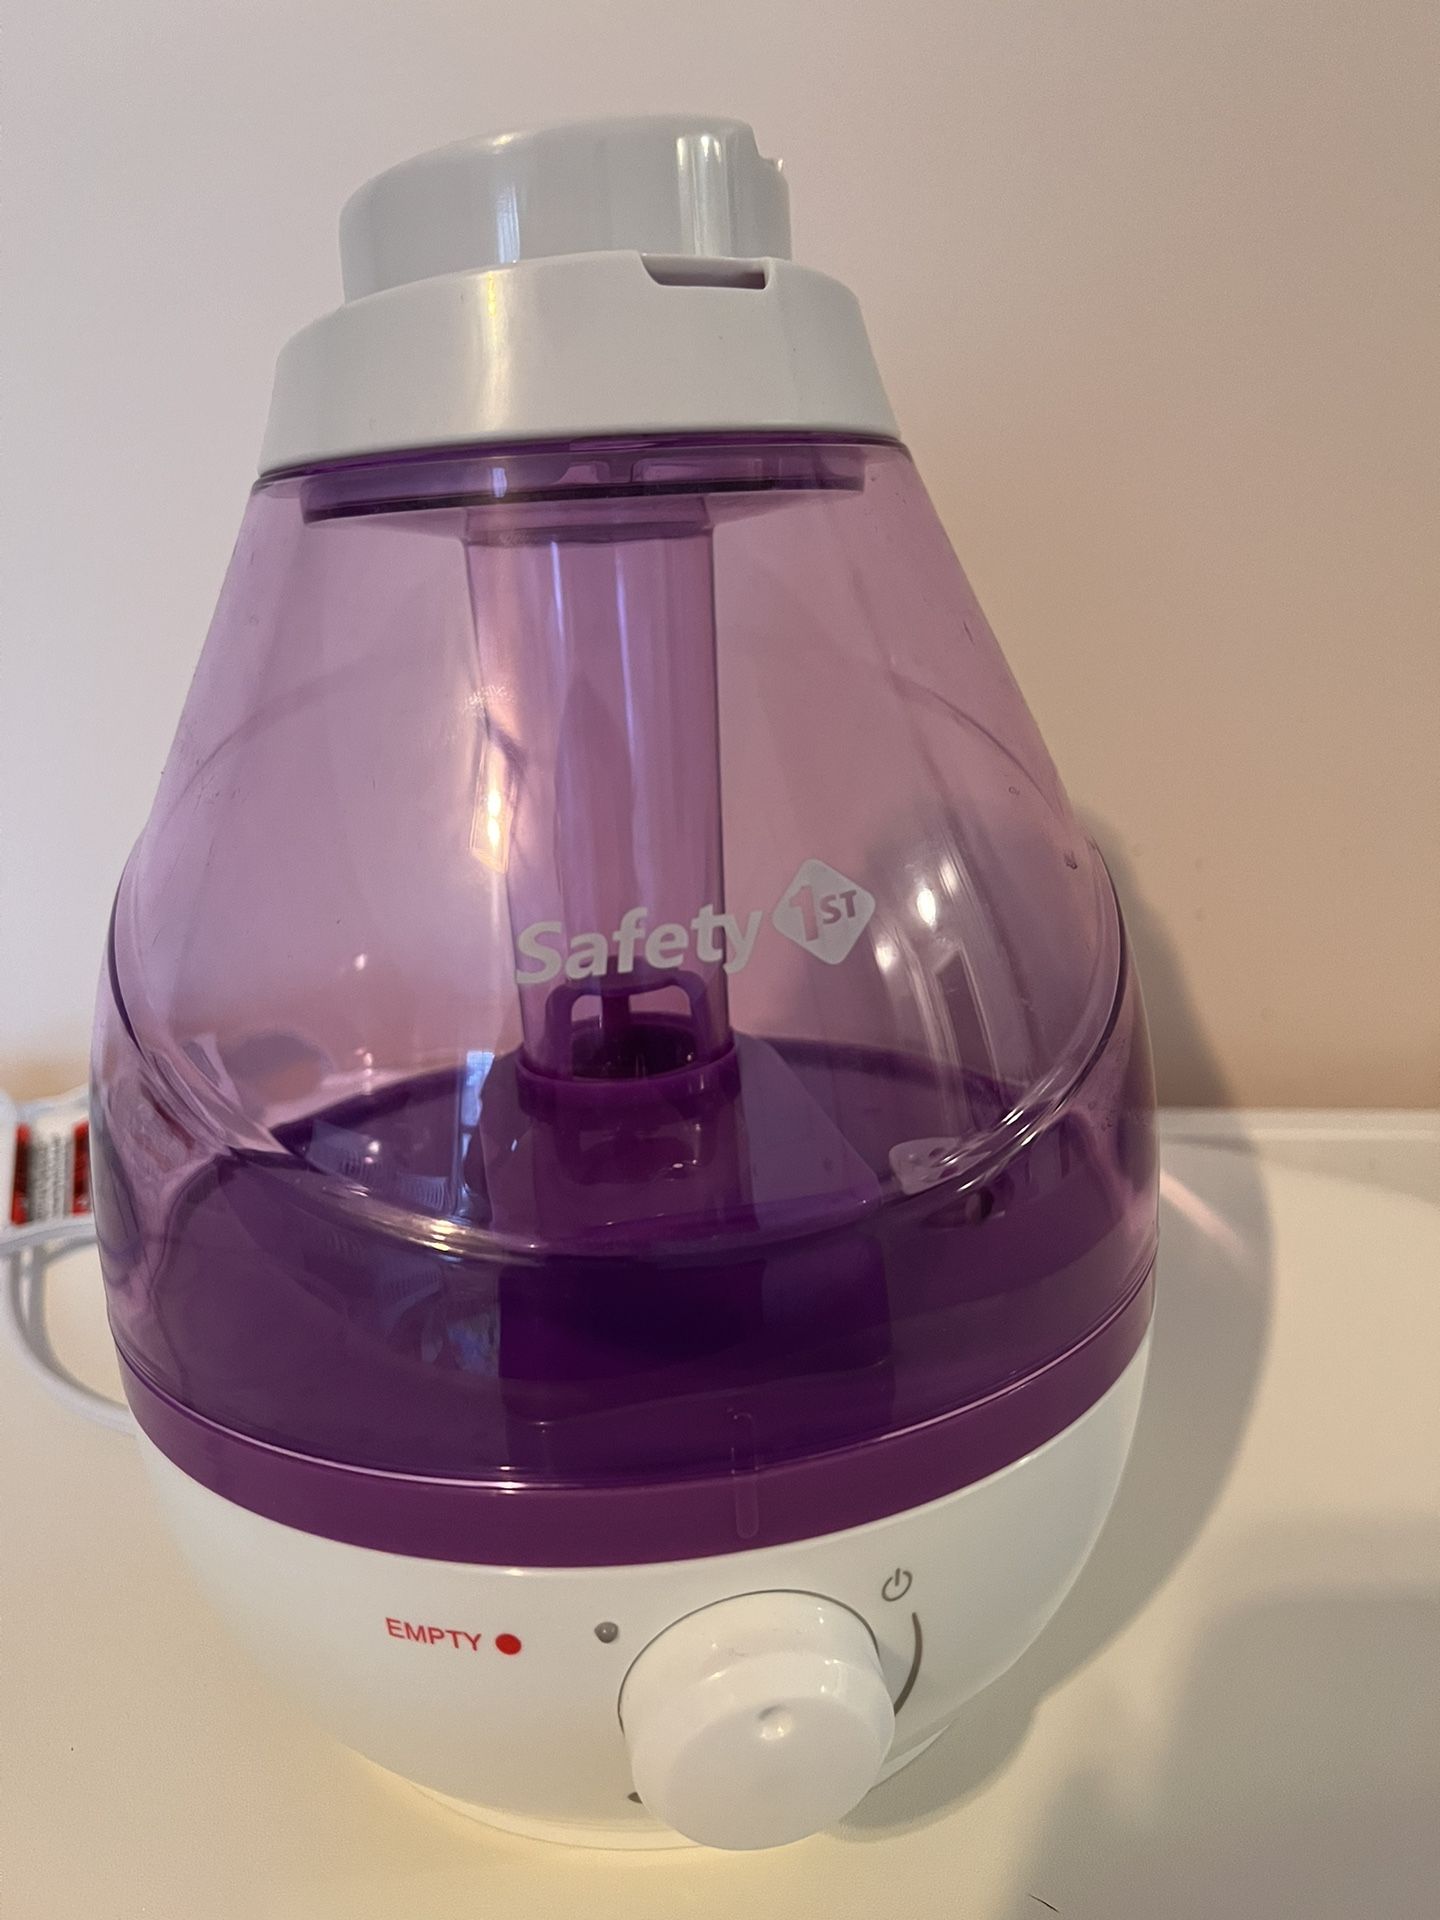 Safety 1st Humidifier 